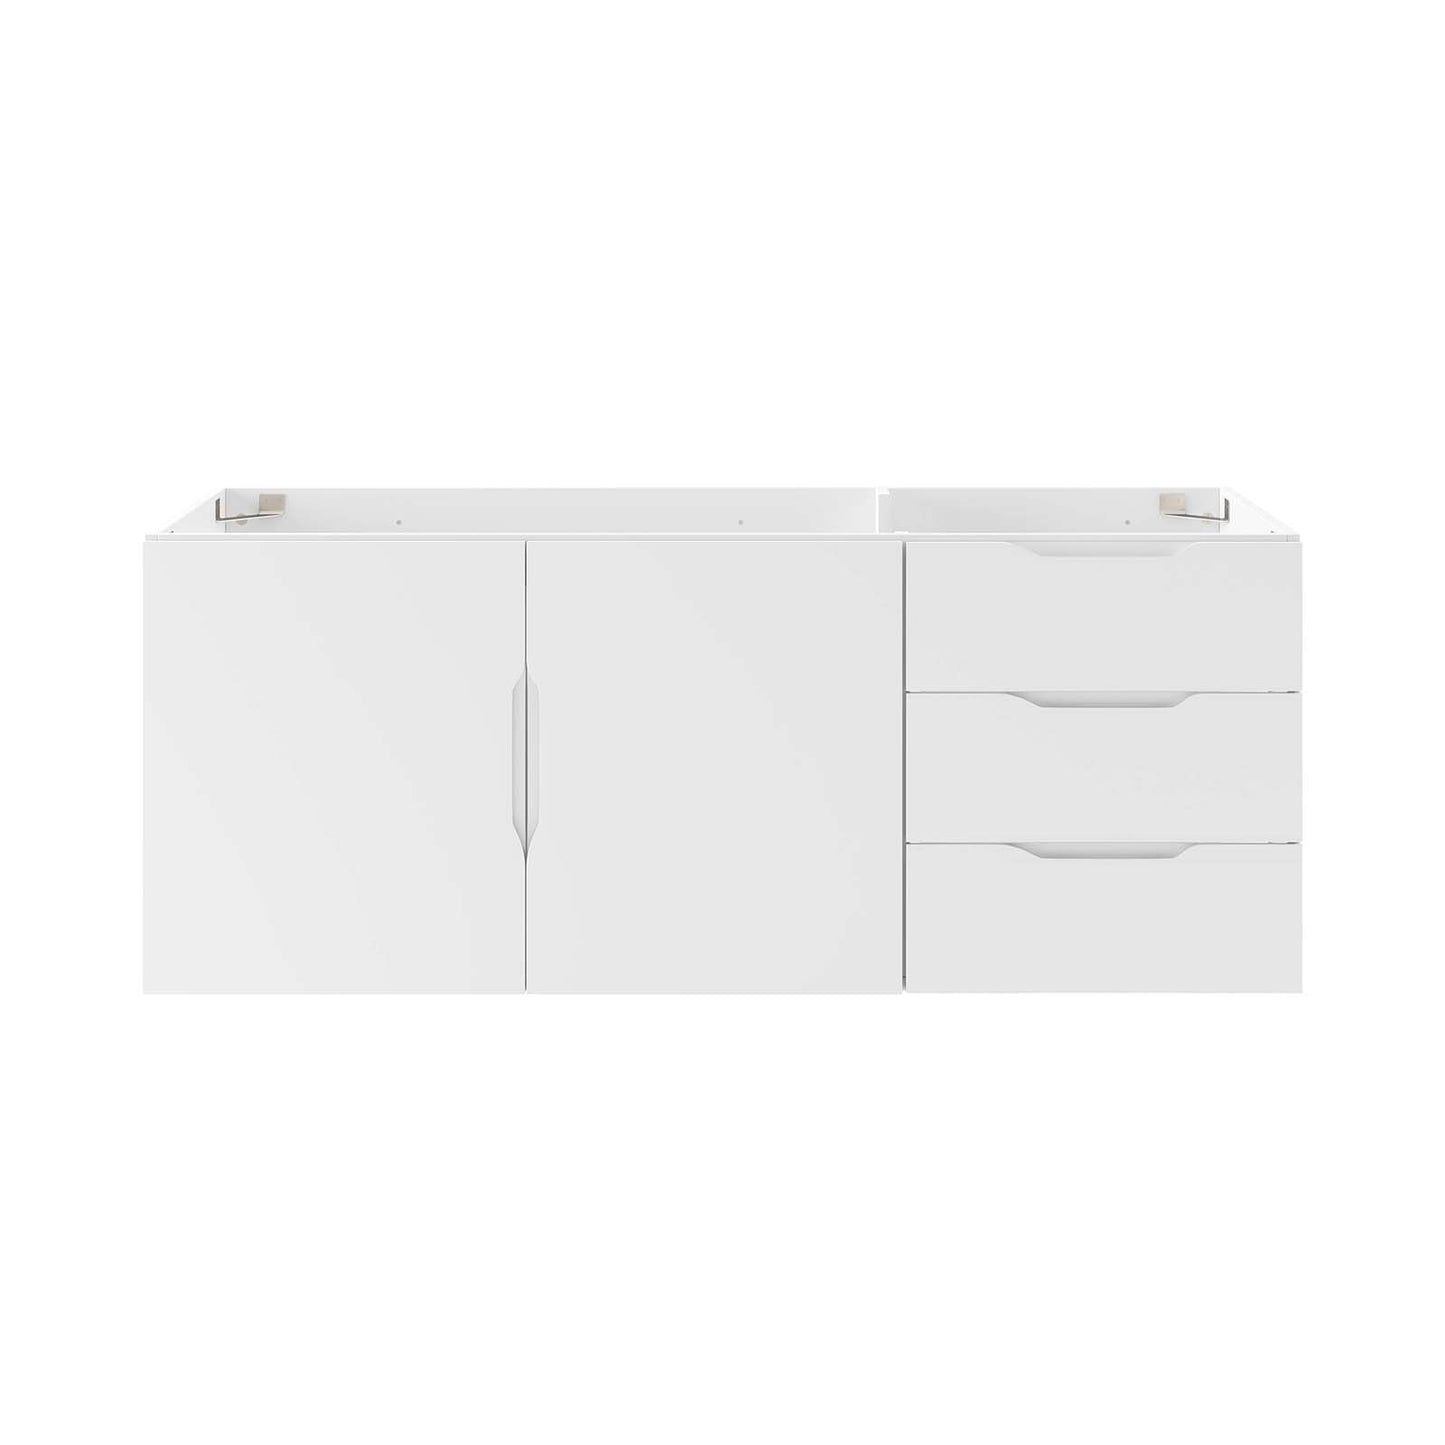 Vitality 48" Double or Single Sink Compatible (Not Included) Bathroom Vanity Cabinet White EEI-4895-WHI